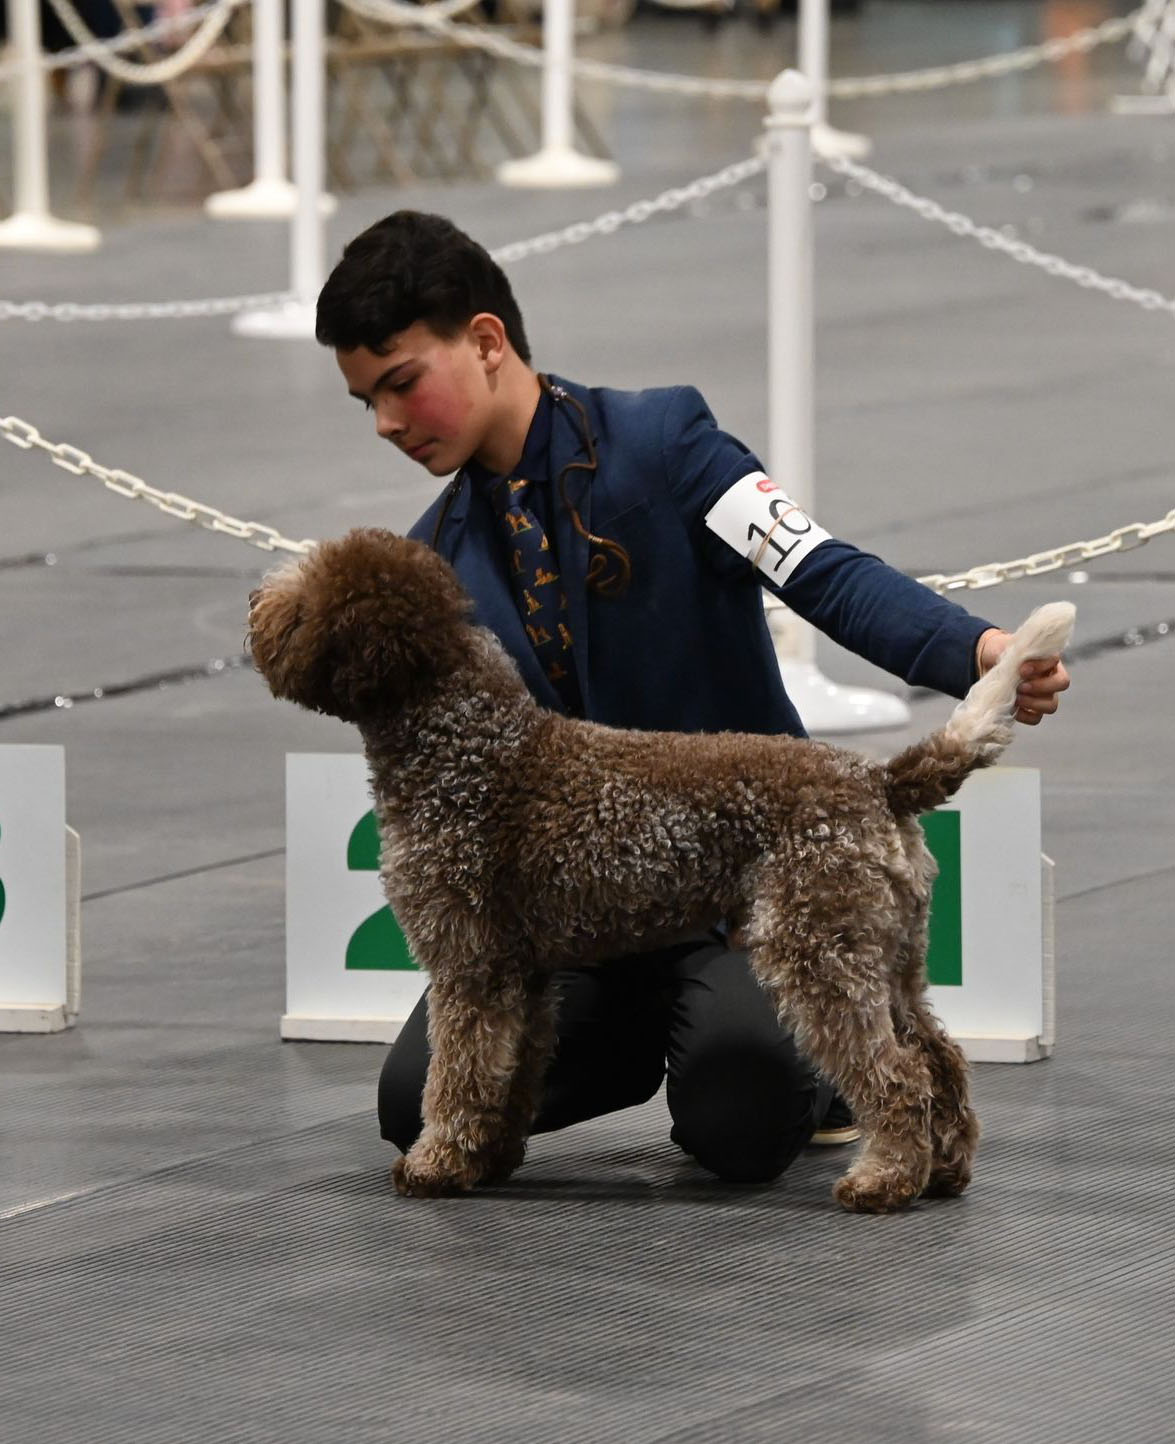 Danny the Lagotto Romagnolo at Dog Show with Ribbons